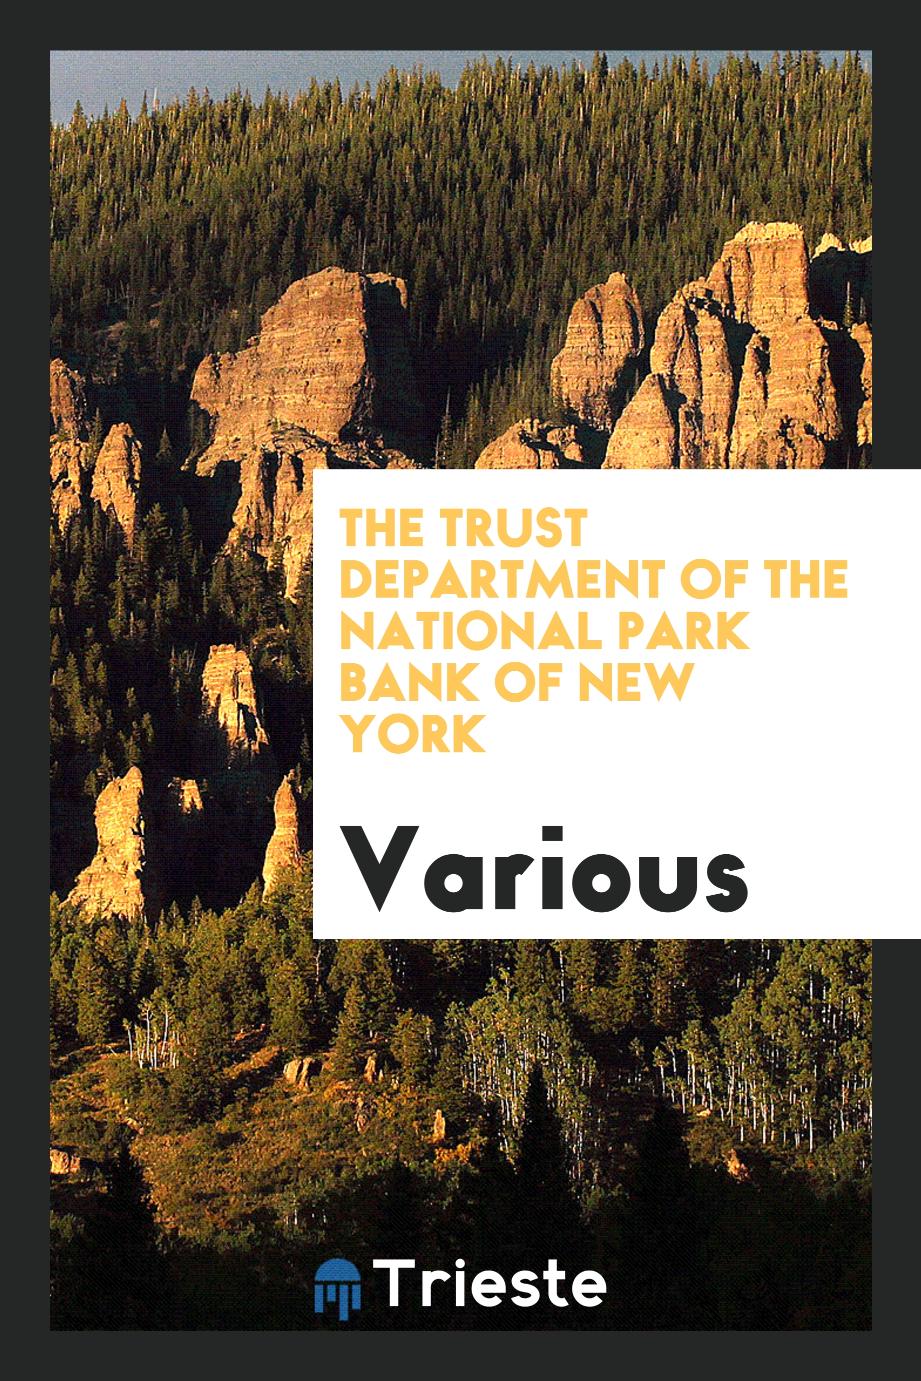 The trust department of the National Park Bank of New York